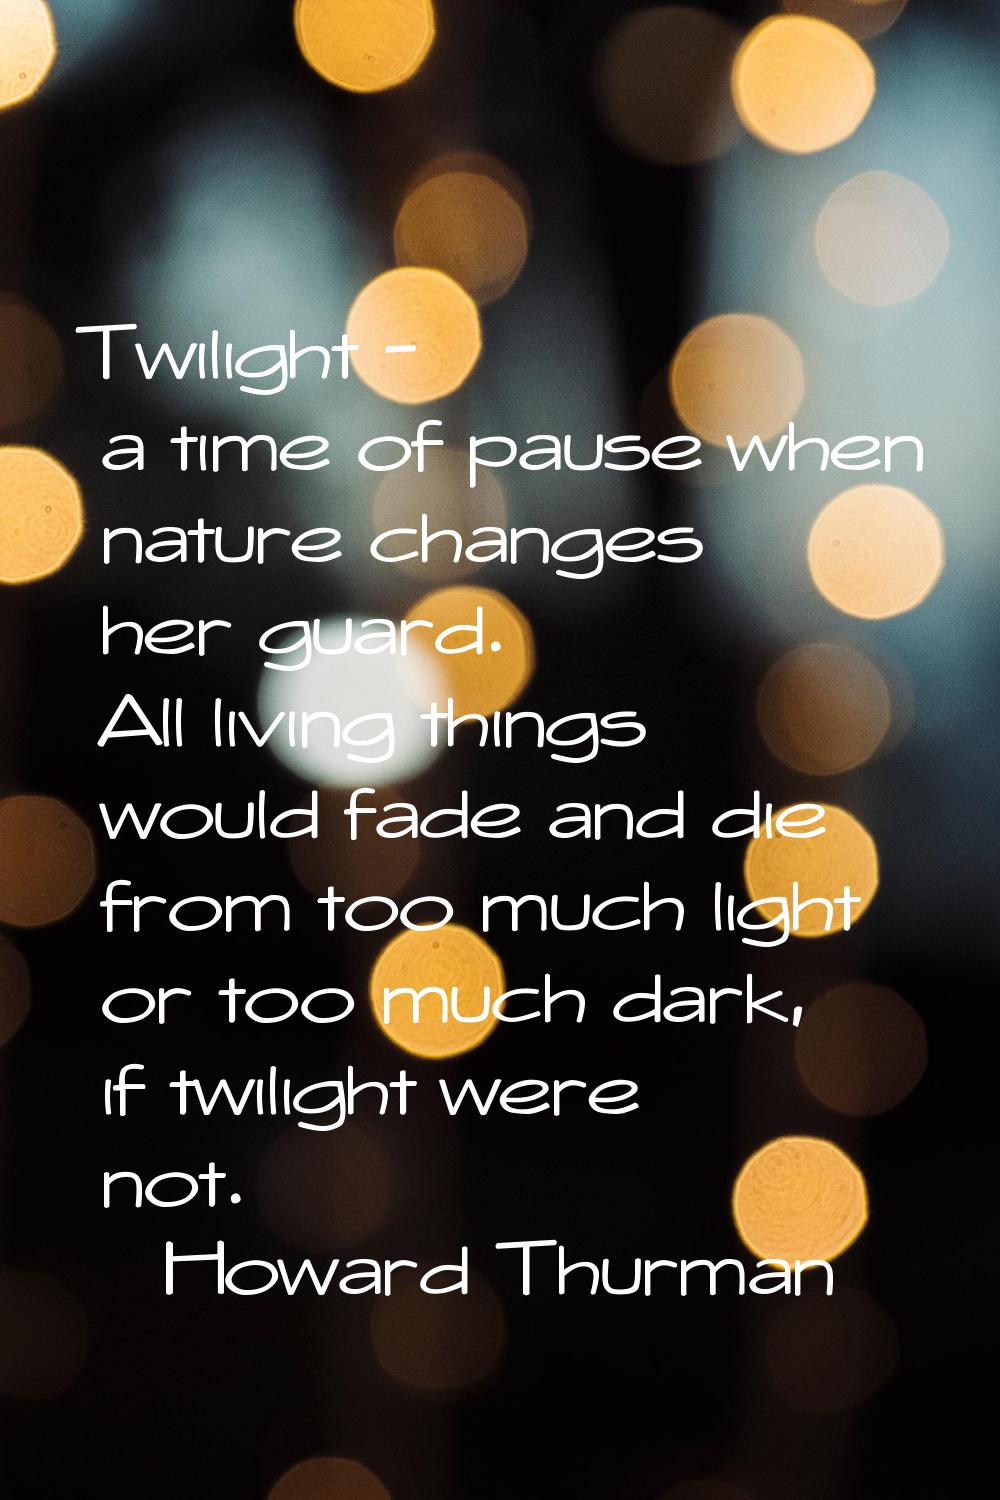 Twilight - a time of pause when nature changes her guard. All living things would fade and die from